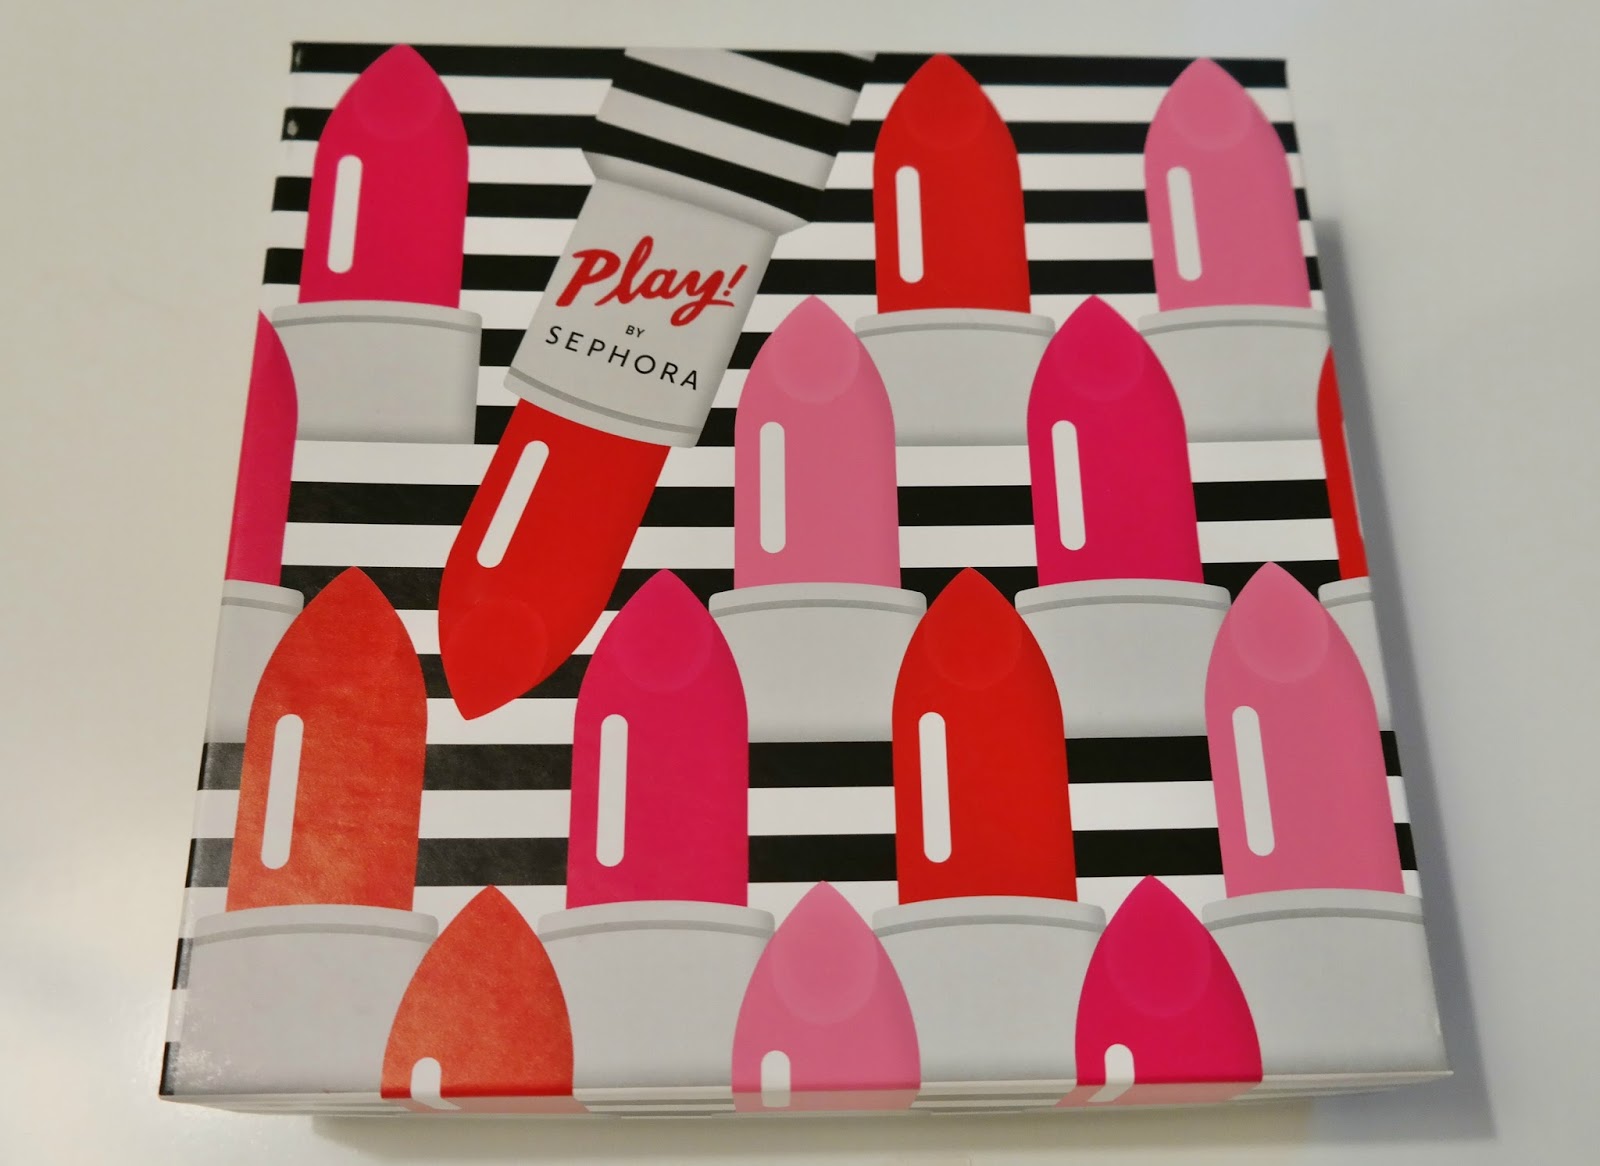 Sephora Play Box & A Giveaway